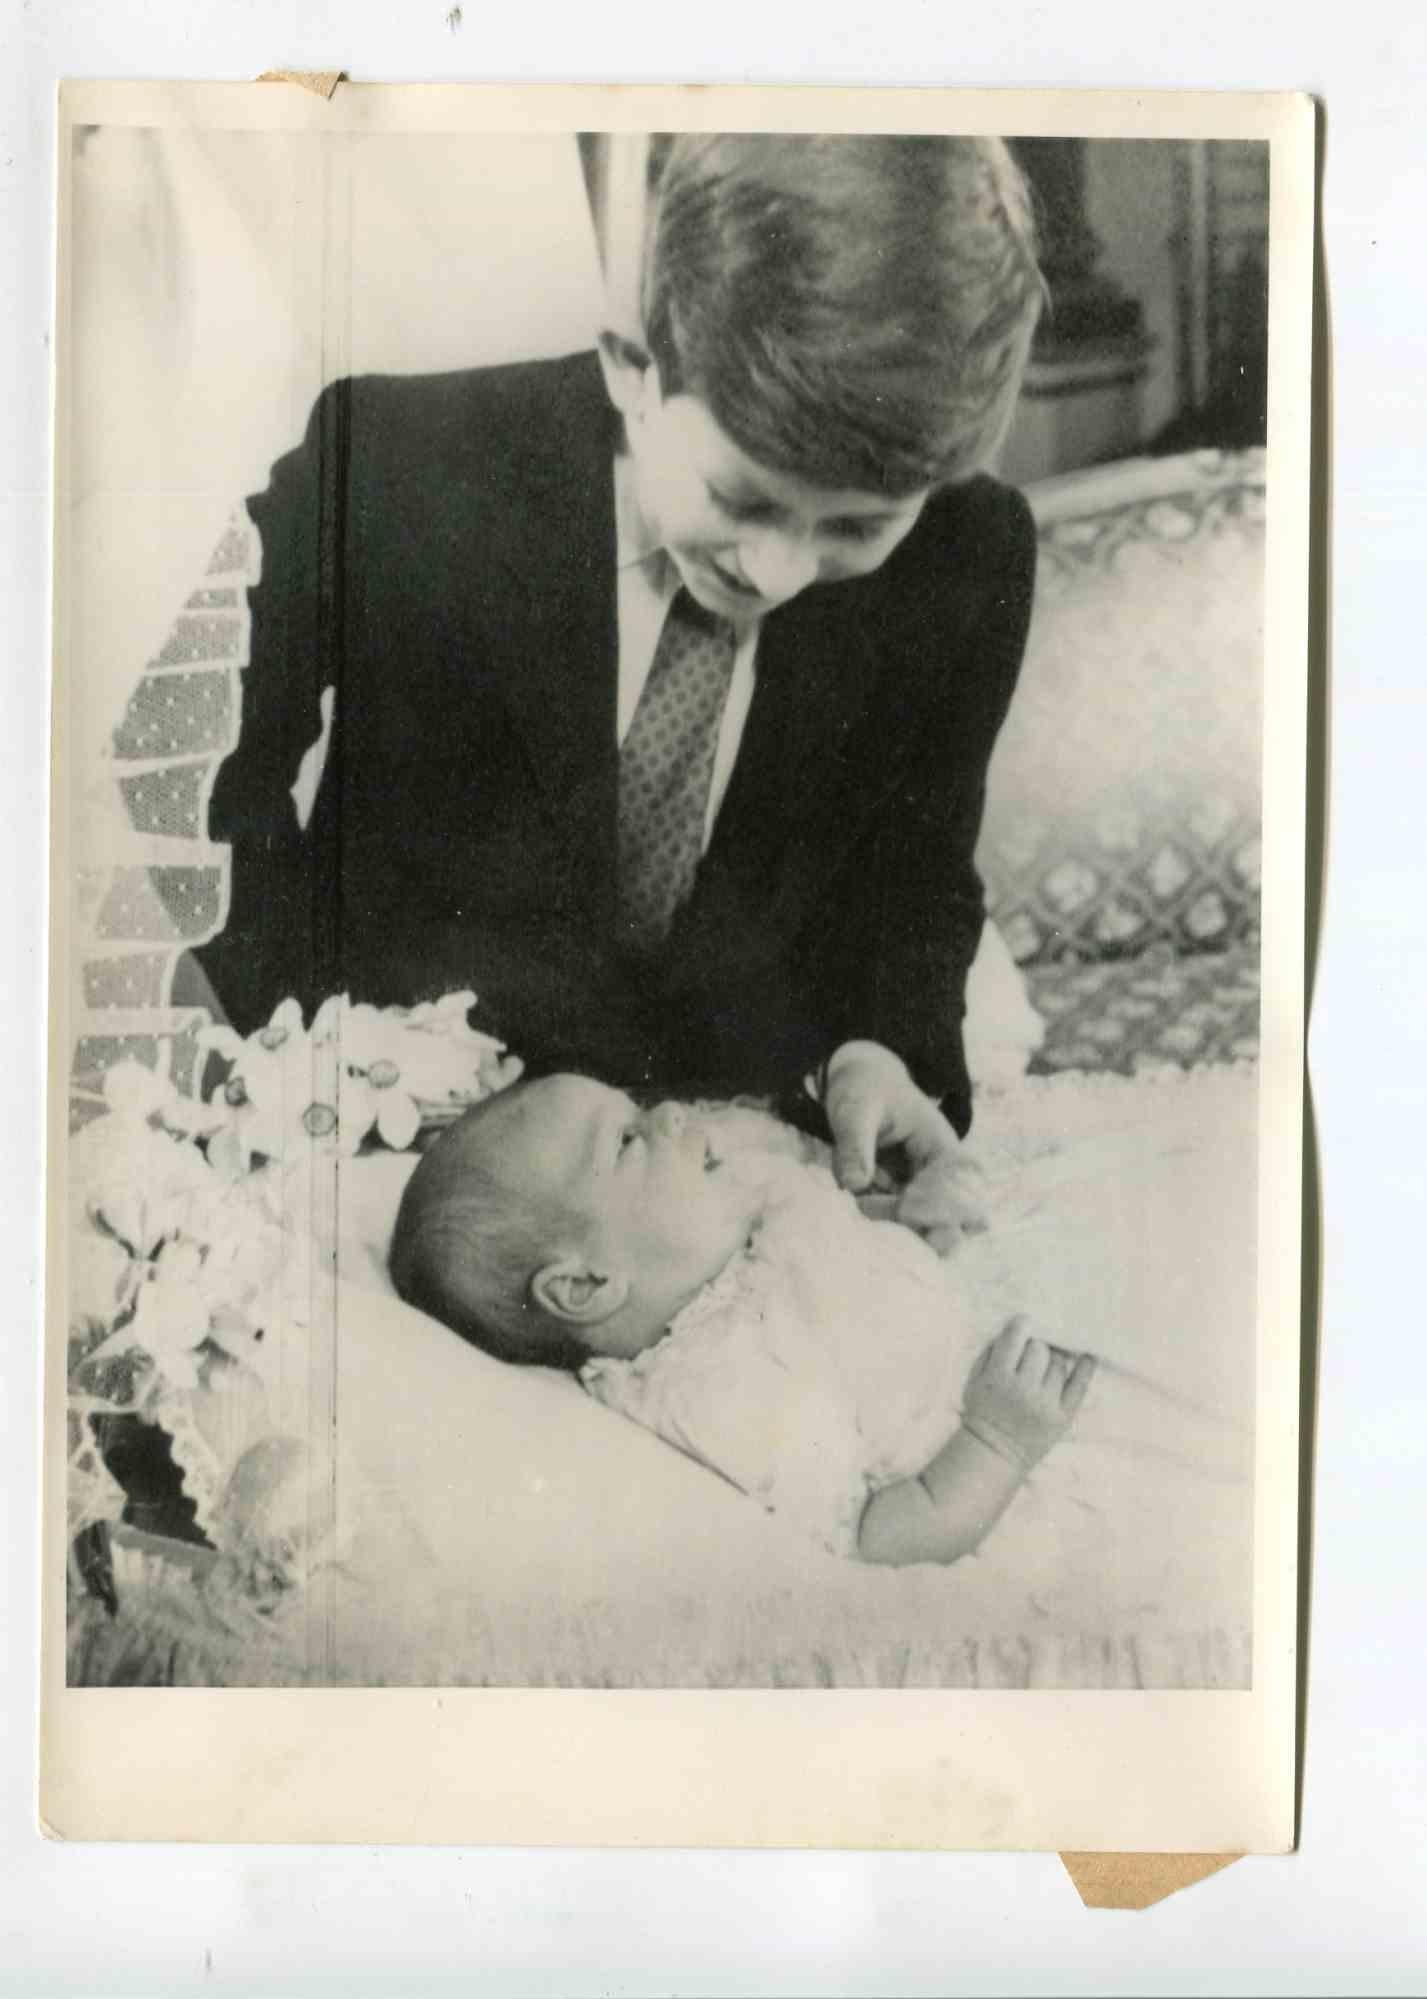 Unknown Portrait Photograph - Prince Charles with Baby Prince Andrew - Vintage Photograph - 1960